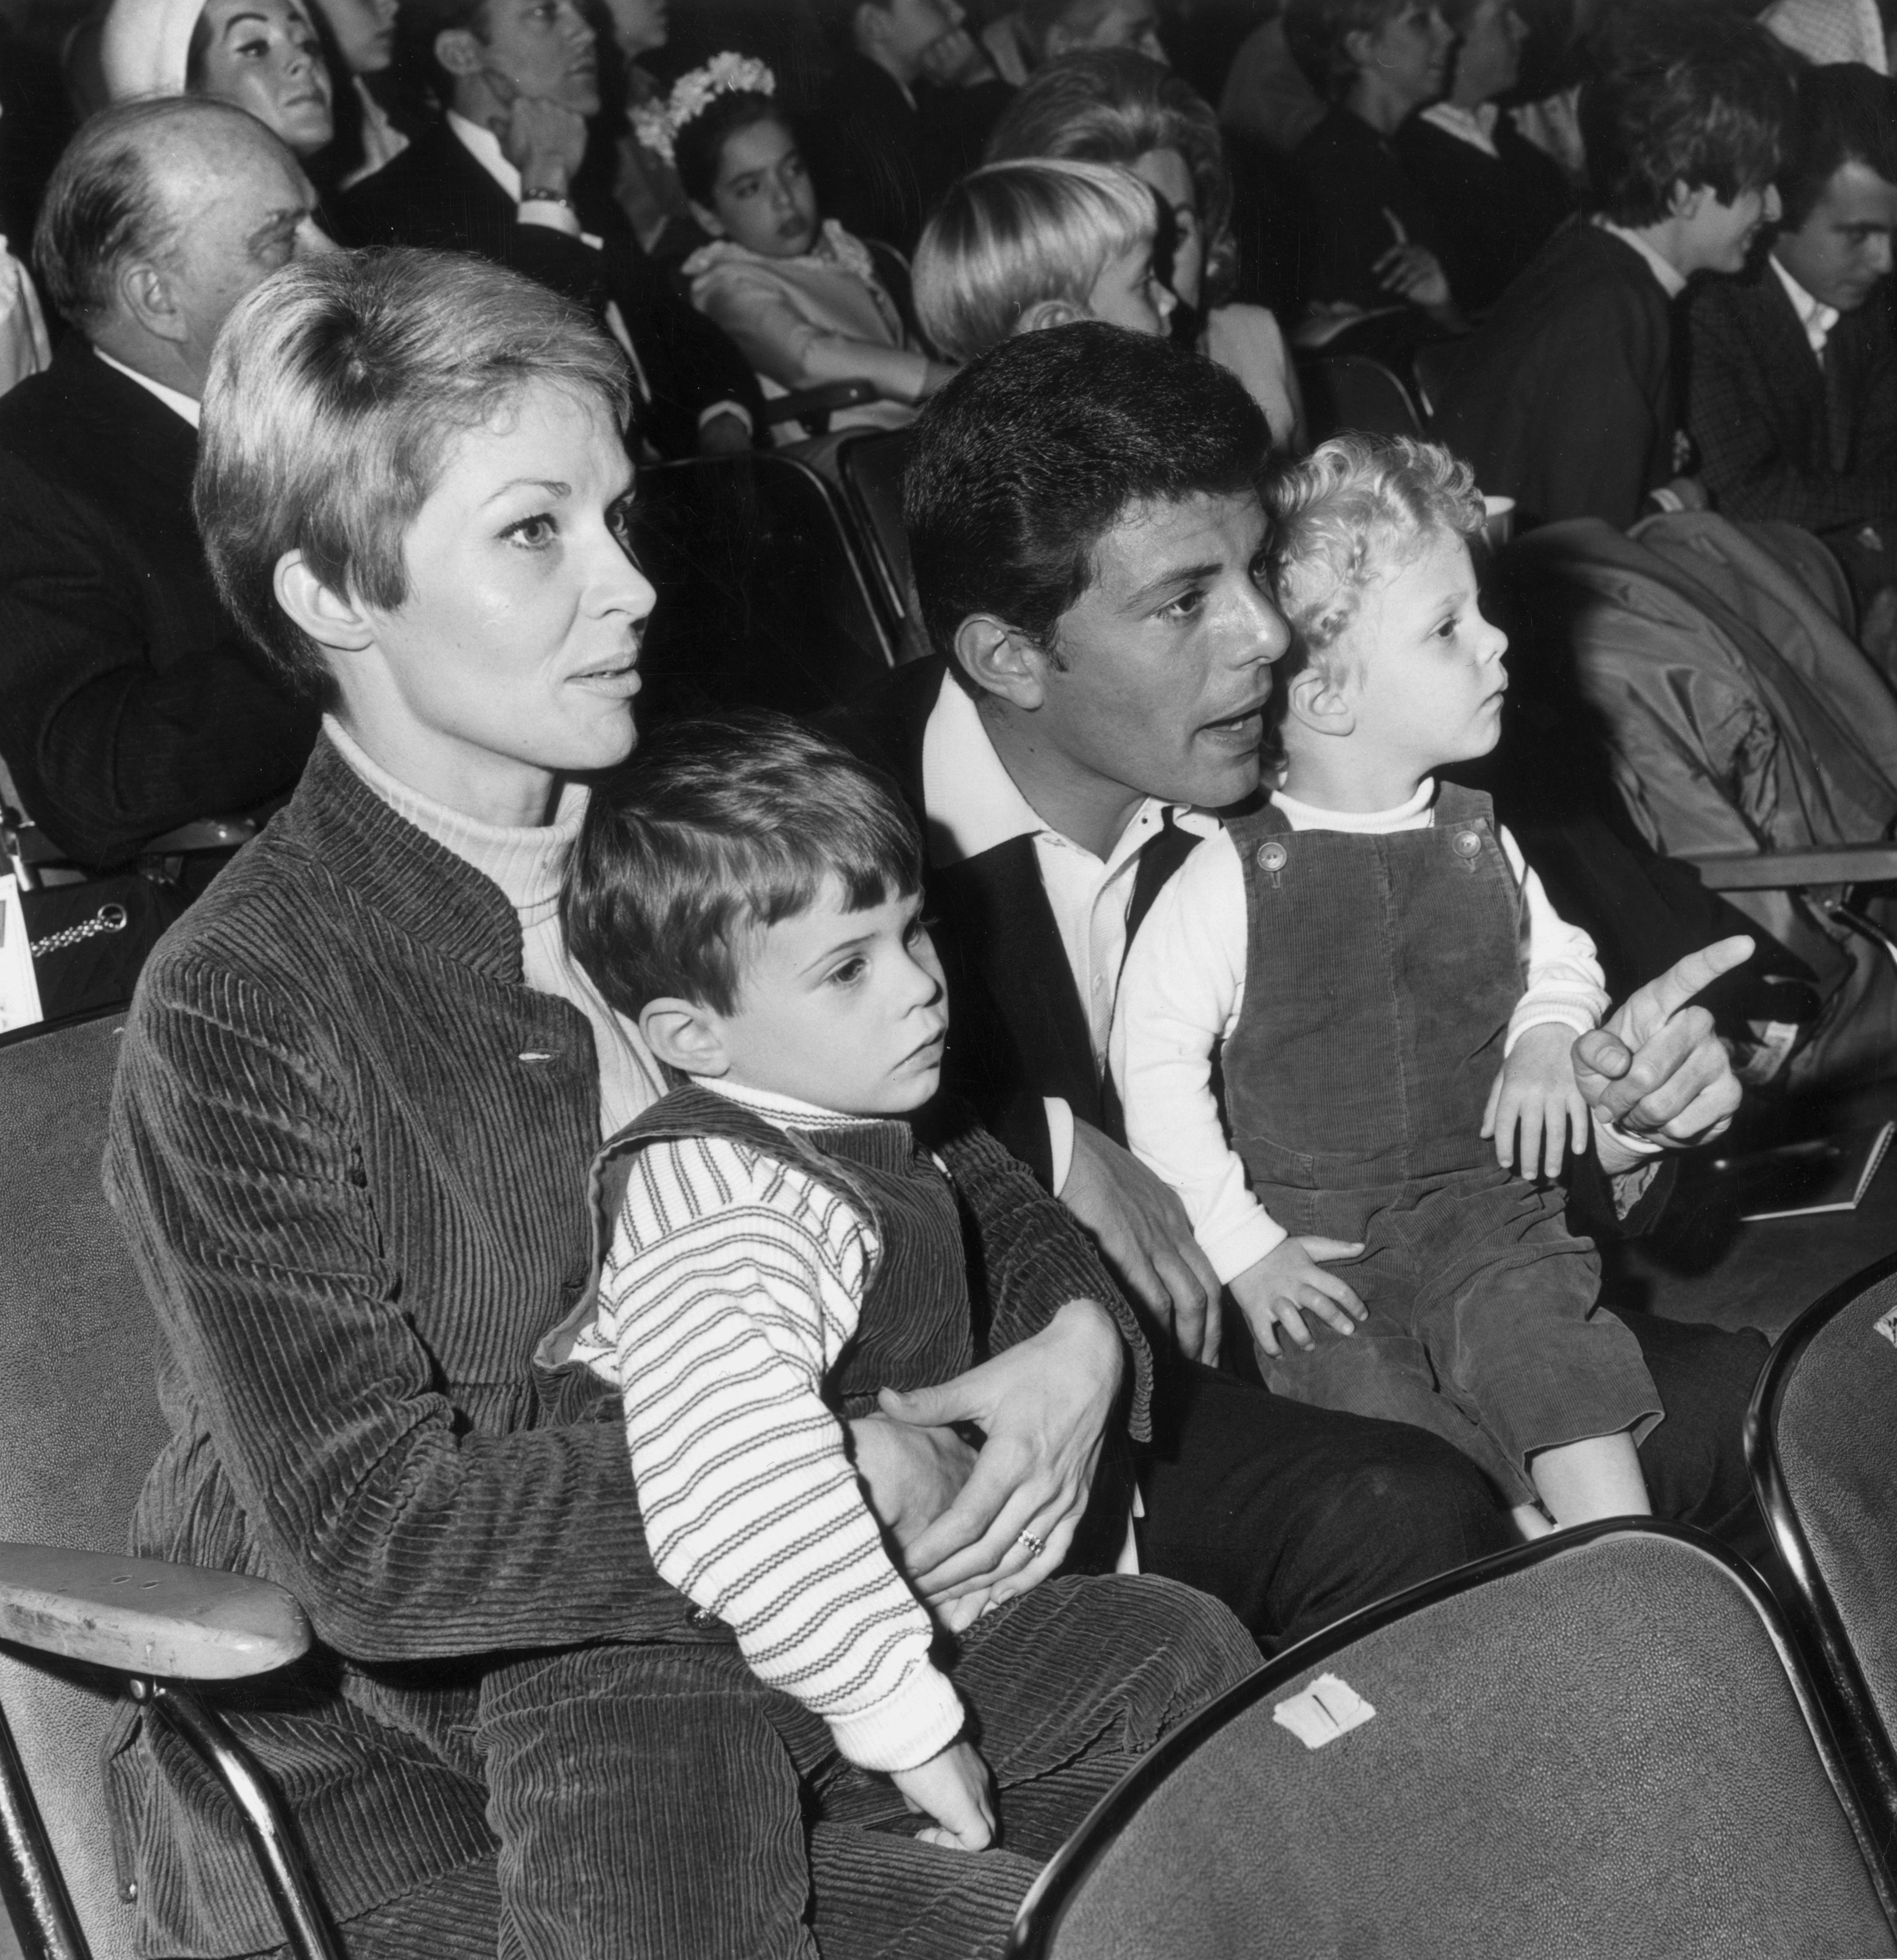 American actor and singer Frankie Avalon sits in the audience with his wife, Kathryn, and their two sons, as they attend the Dobritch International Circus on 16th March 1967. | Source: Getty Images